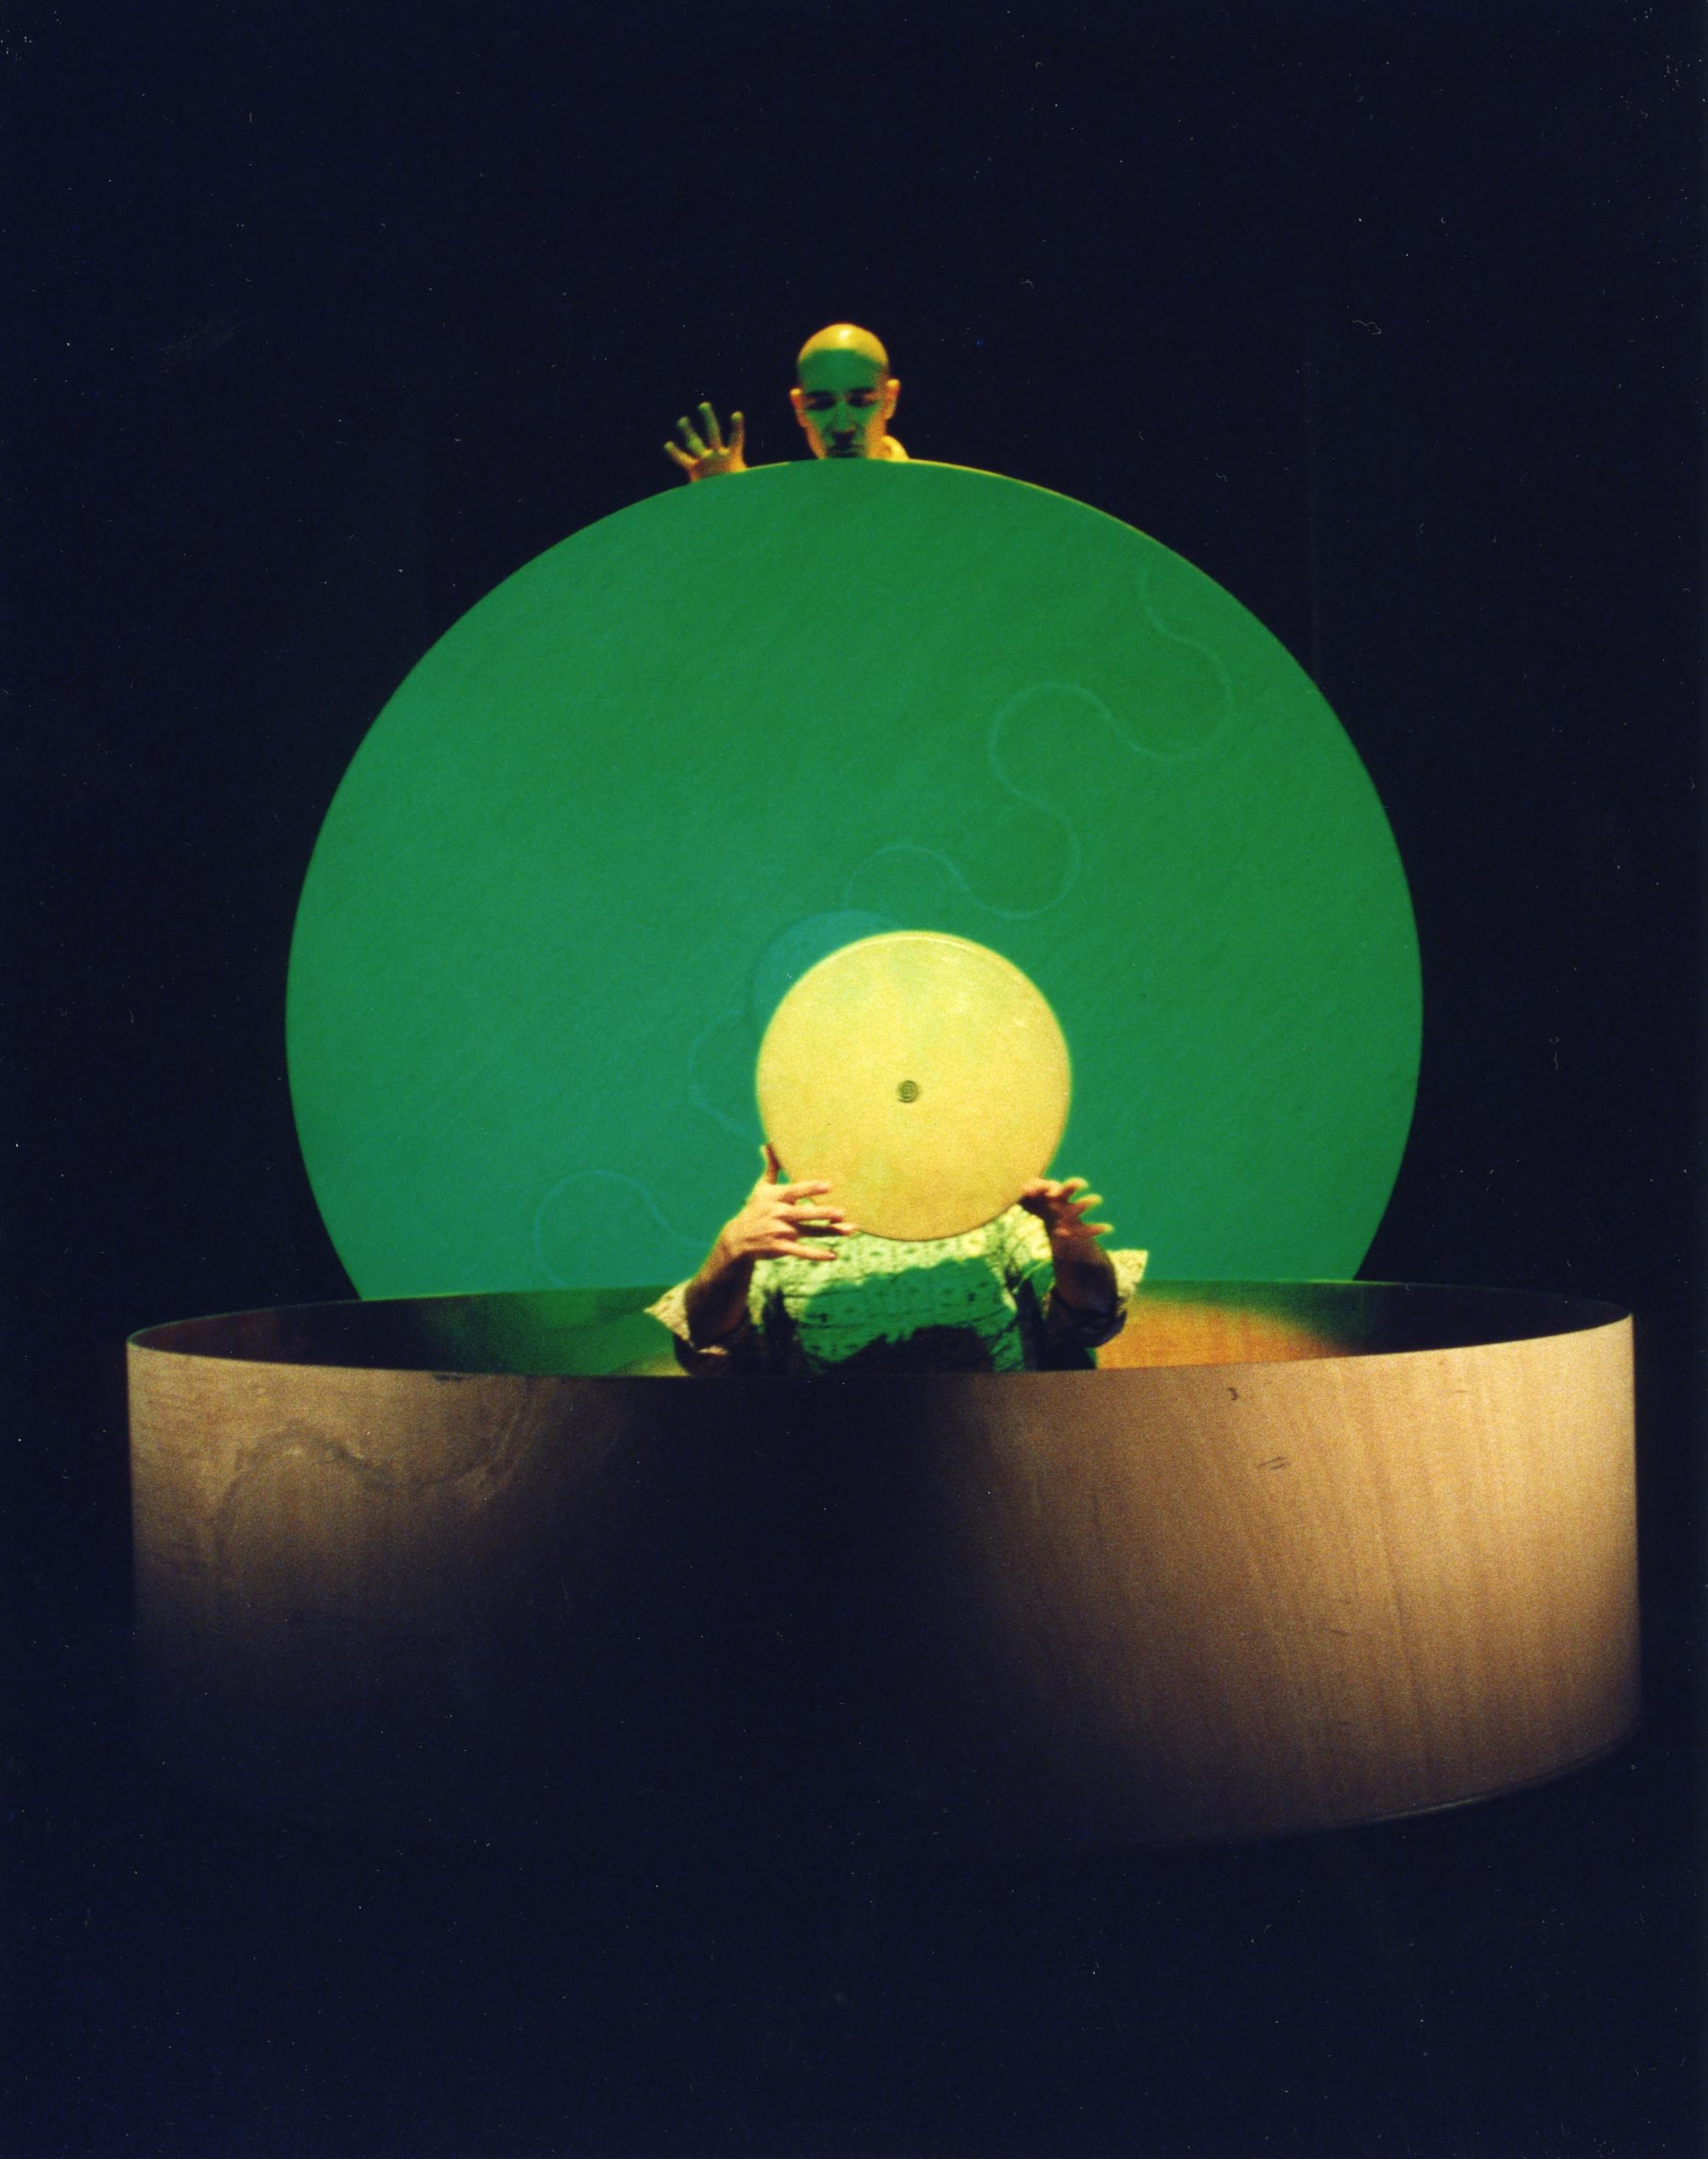 In the background, a performer looks over the top of a large green circular object. His head and one hand are visible. He looks down at another performer who sits in the middle of a large circular wooden shape holding a small circular shape in front of their head.